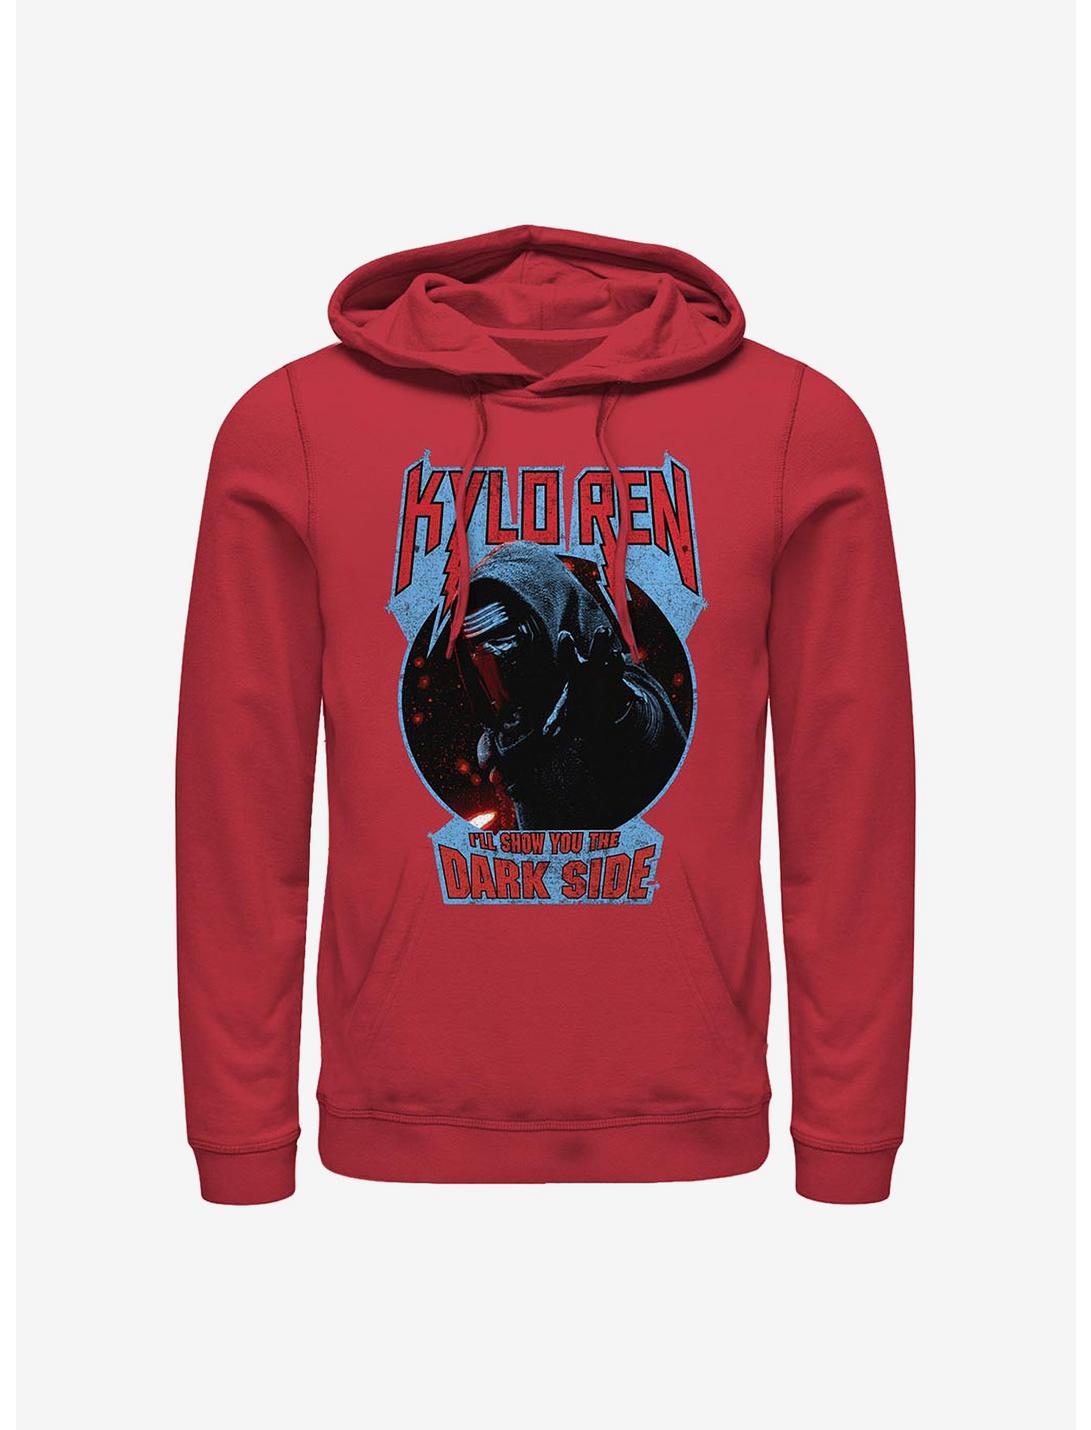 Star Wars: The Force Awakens Kylo Ren Show You The Dark Side Hoodie, RED, hi-res